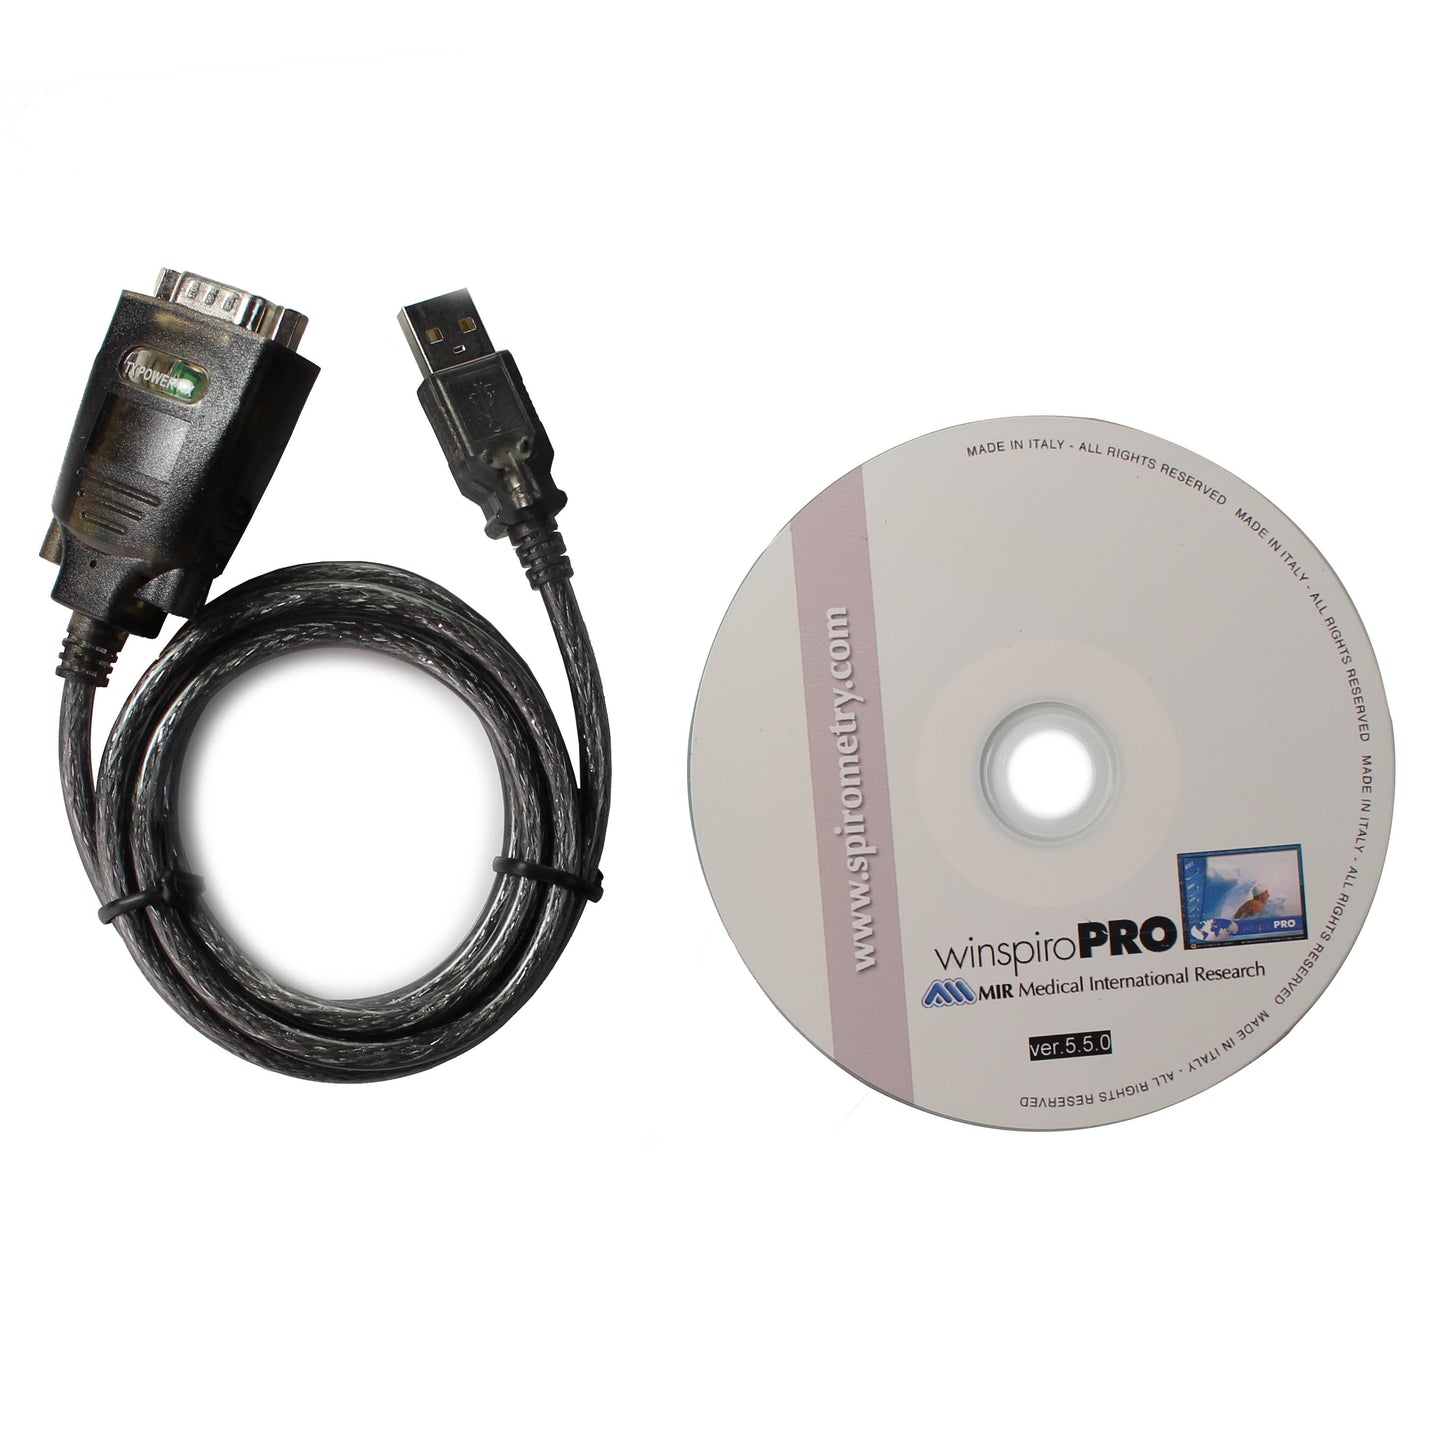 MIR USB to serial converter cable